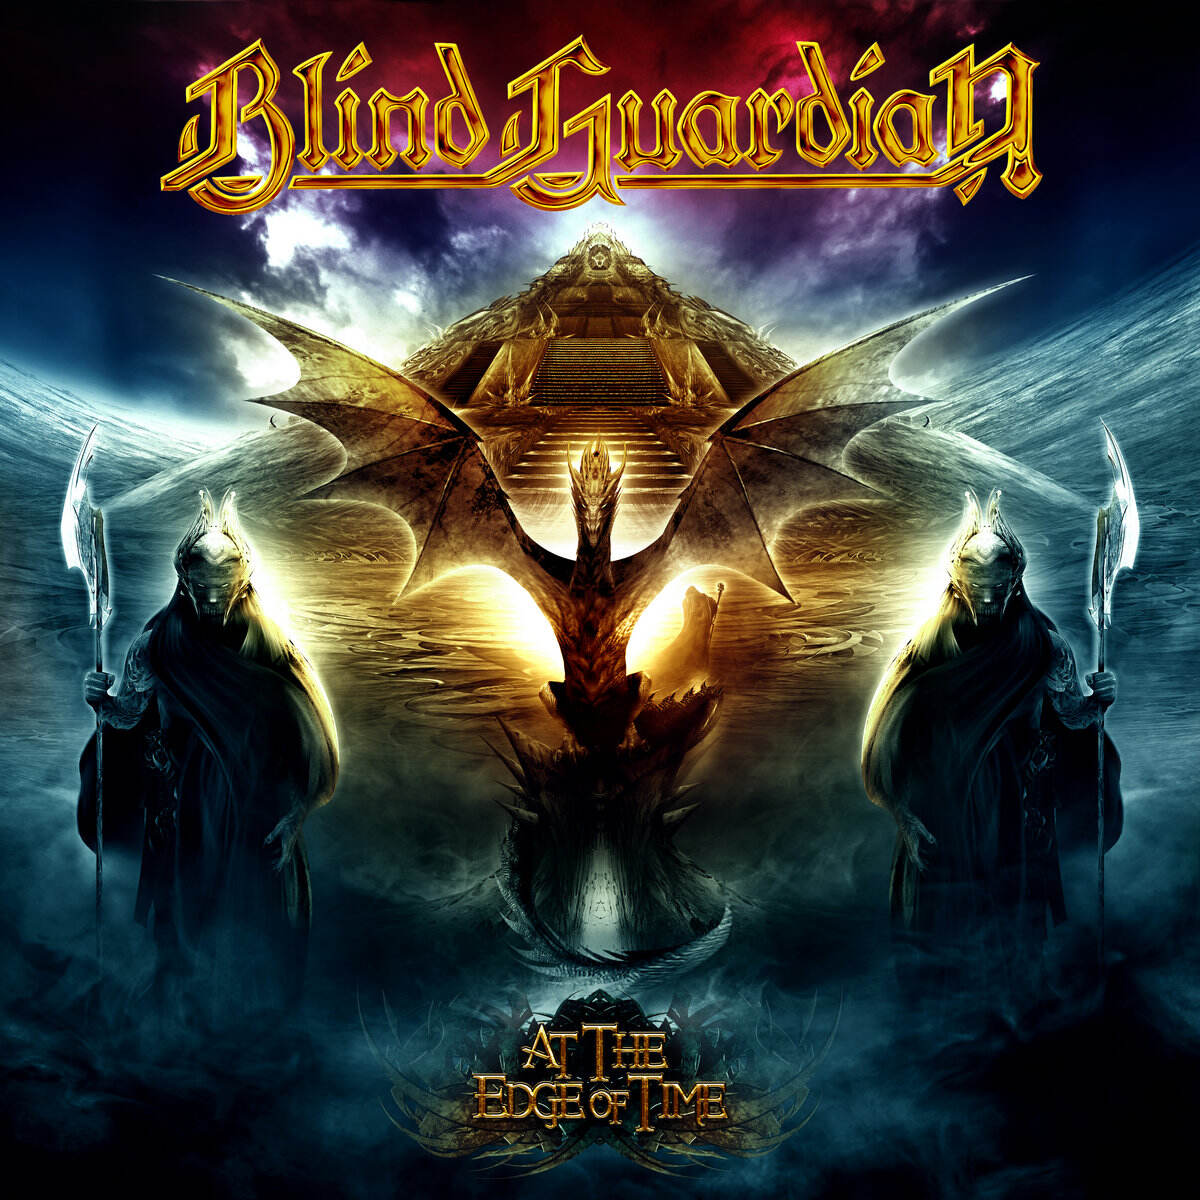 (Power/Progressive Metal) Blind Guardian - At The Edge Of Time (Limited Edition) - 2010, APE (image+.cue), lossless